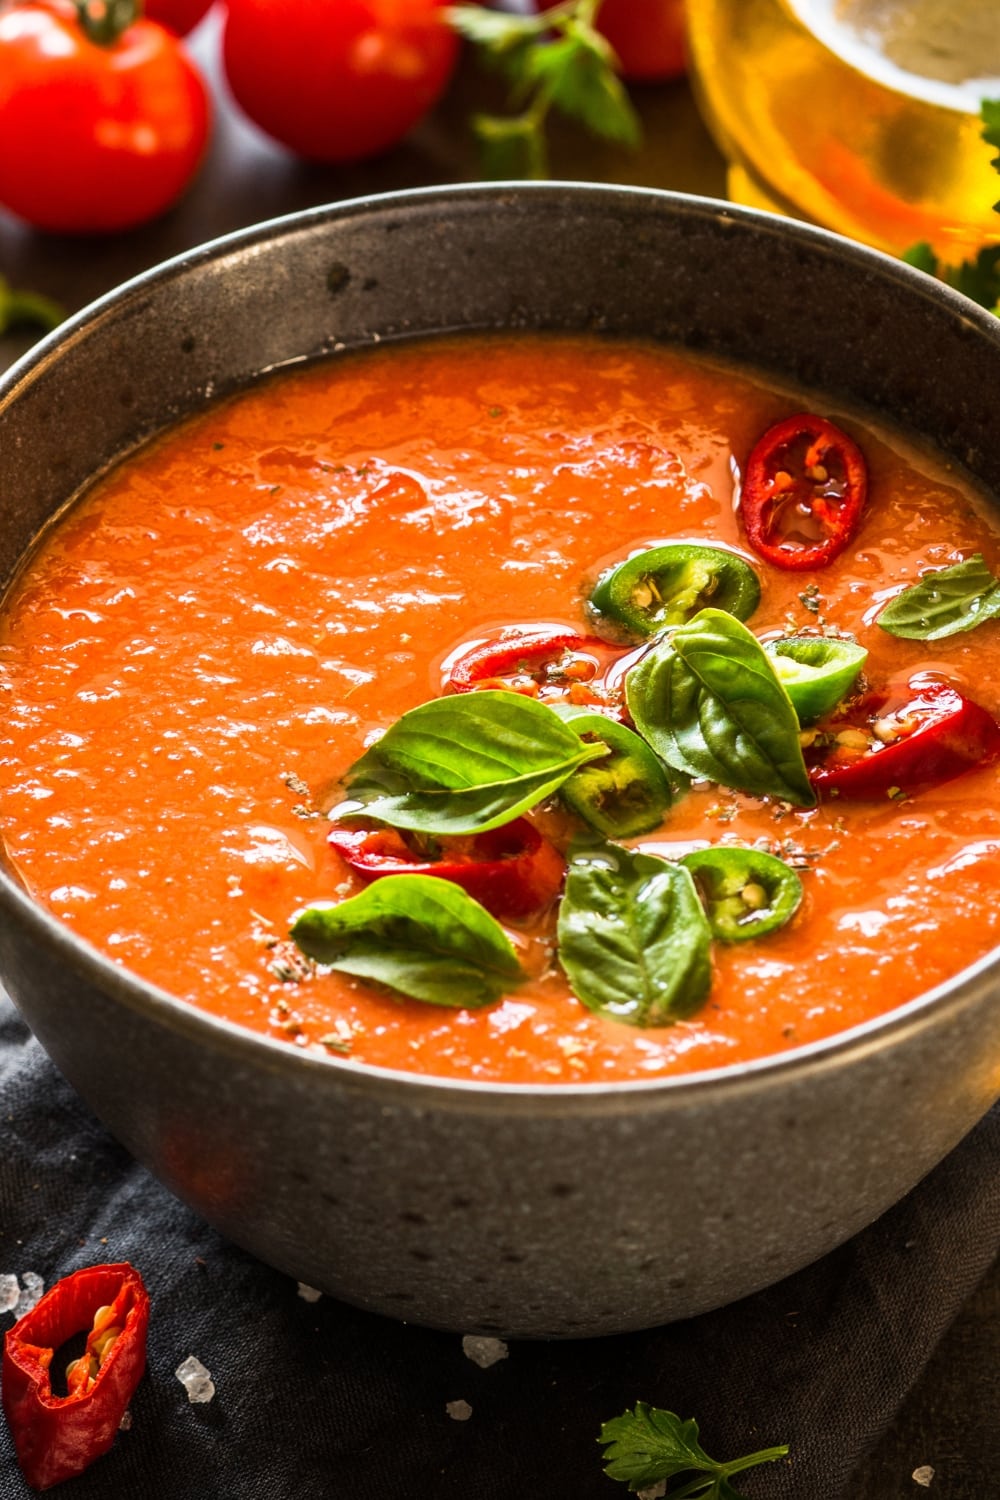 What to Serve with Gazpacho featuring Gazpacho Tomato Soup in Large Brown Bowl with Chili Peppers and Basil